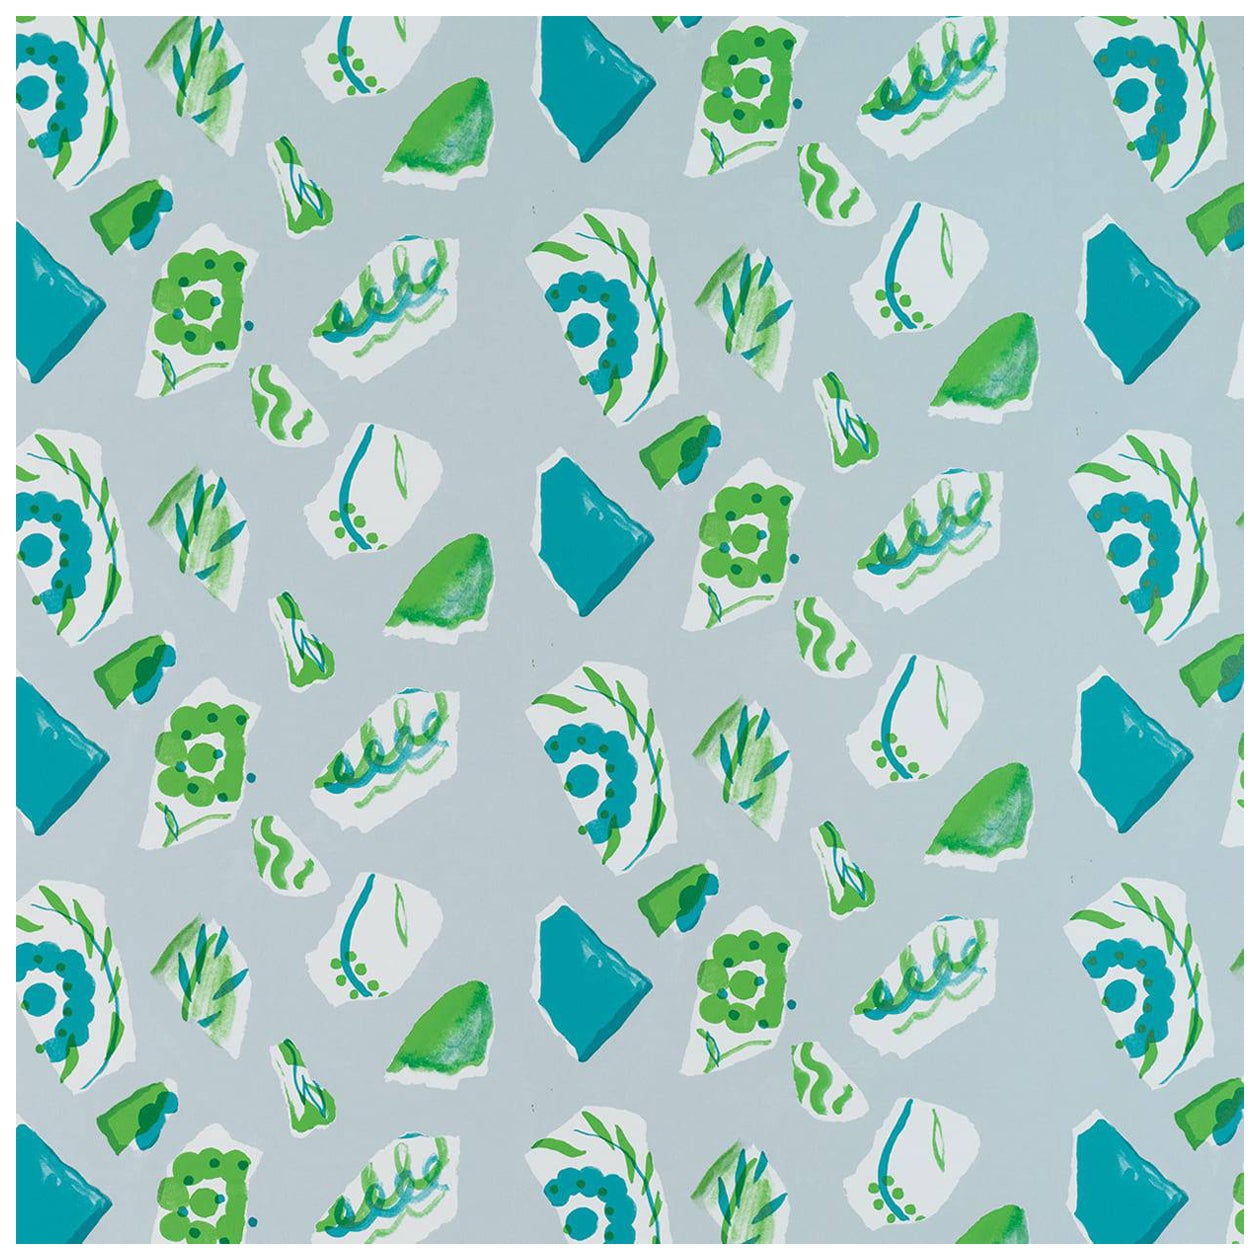 PETITE FRITURE Mosaique Wallpaper Green by Les Crafties